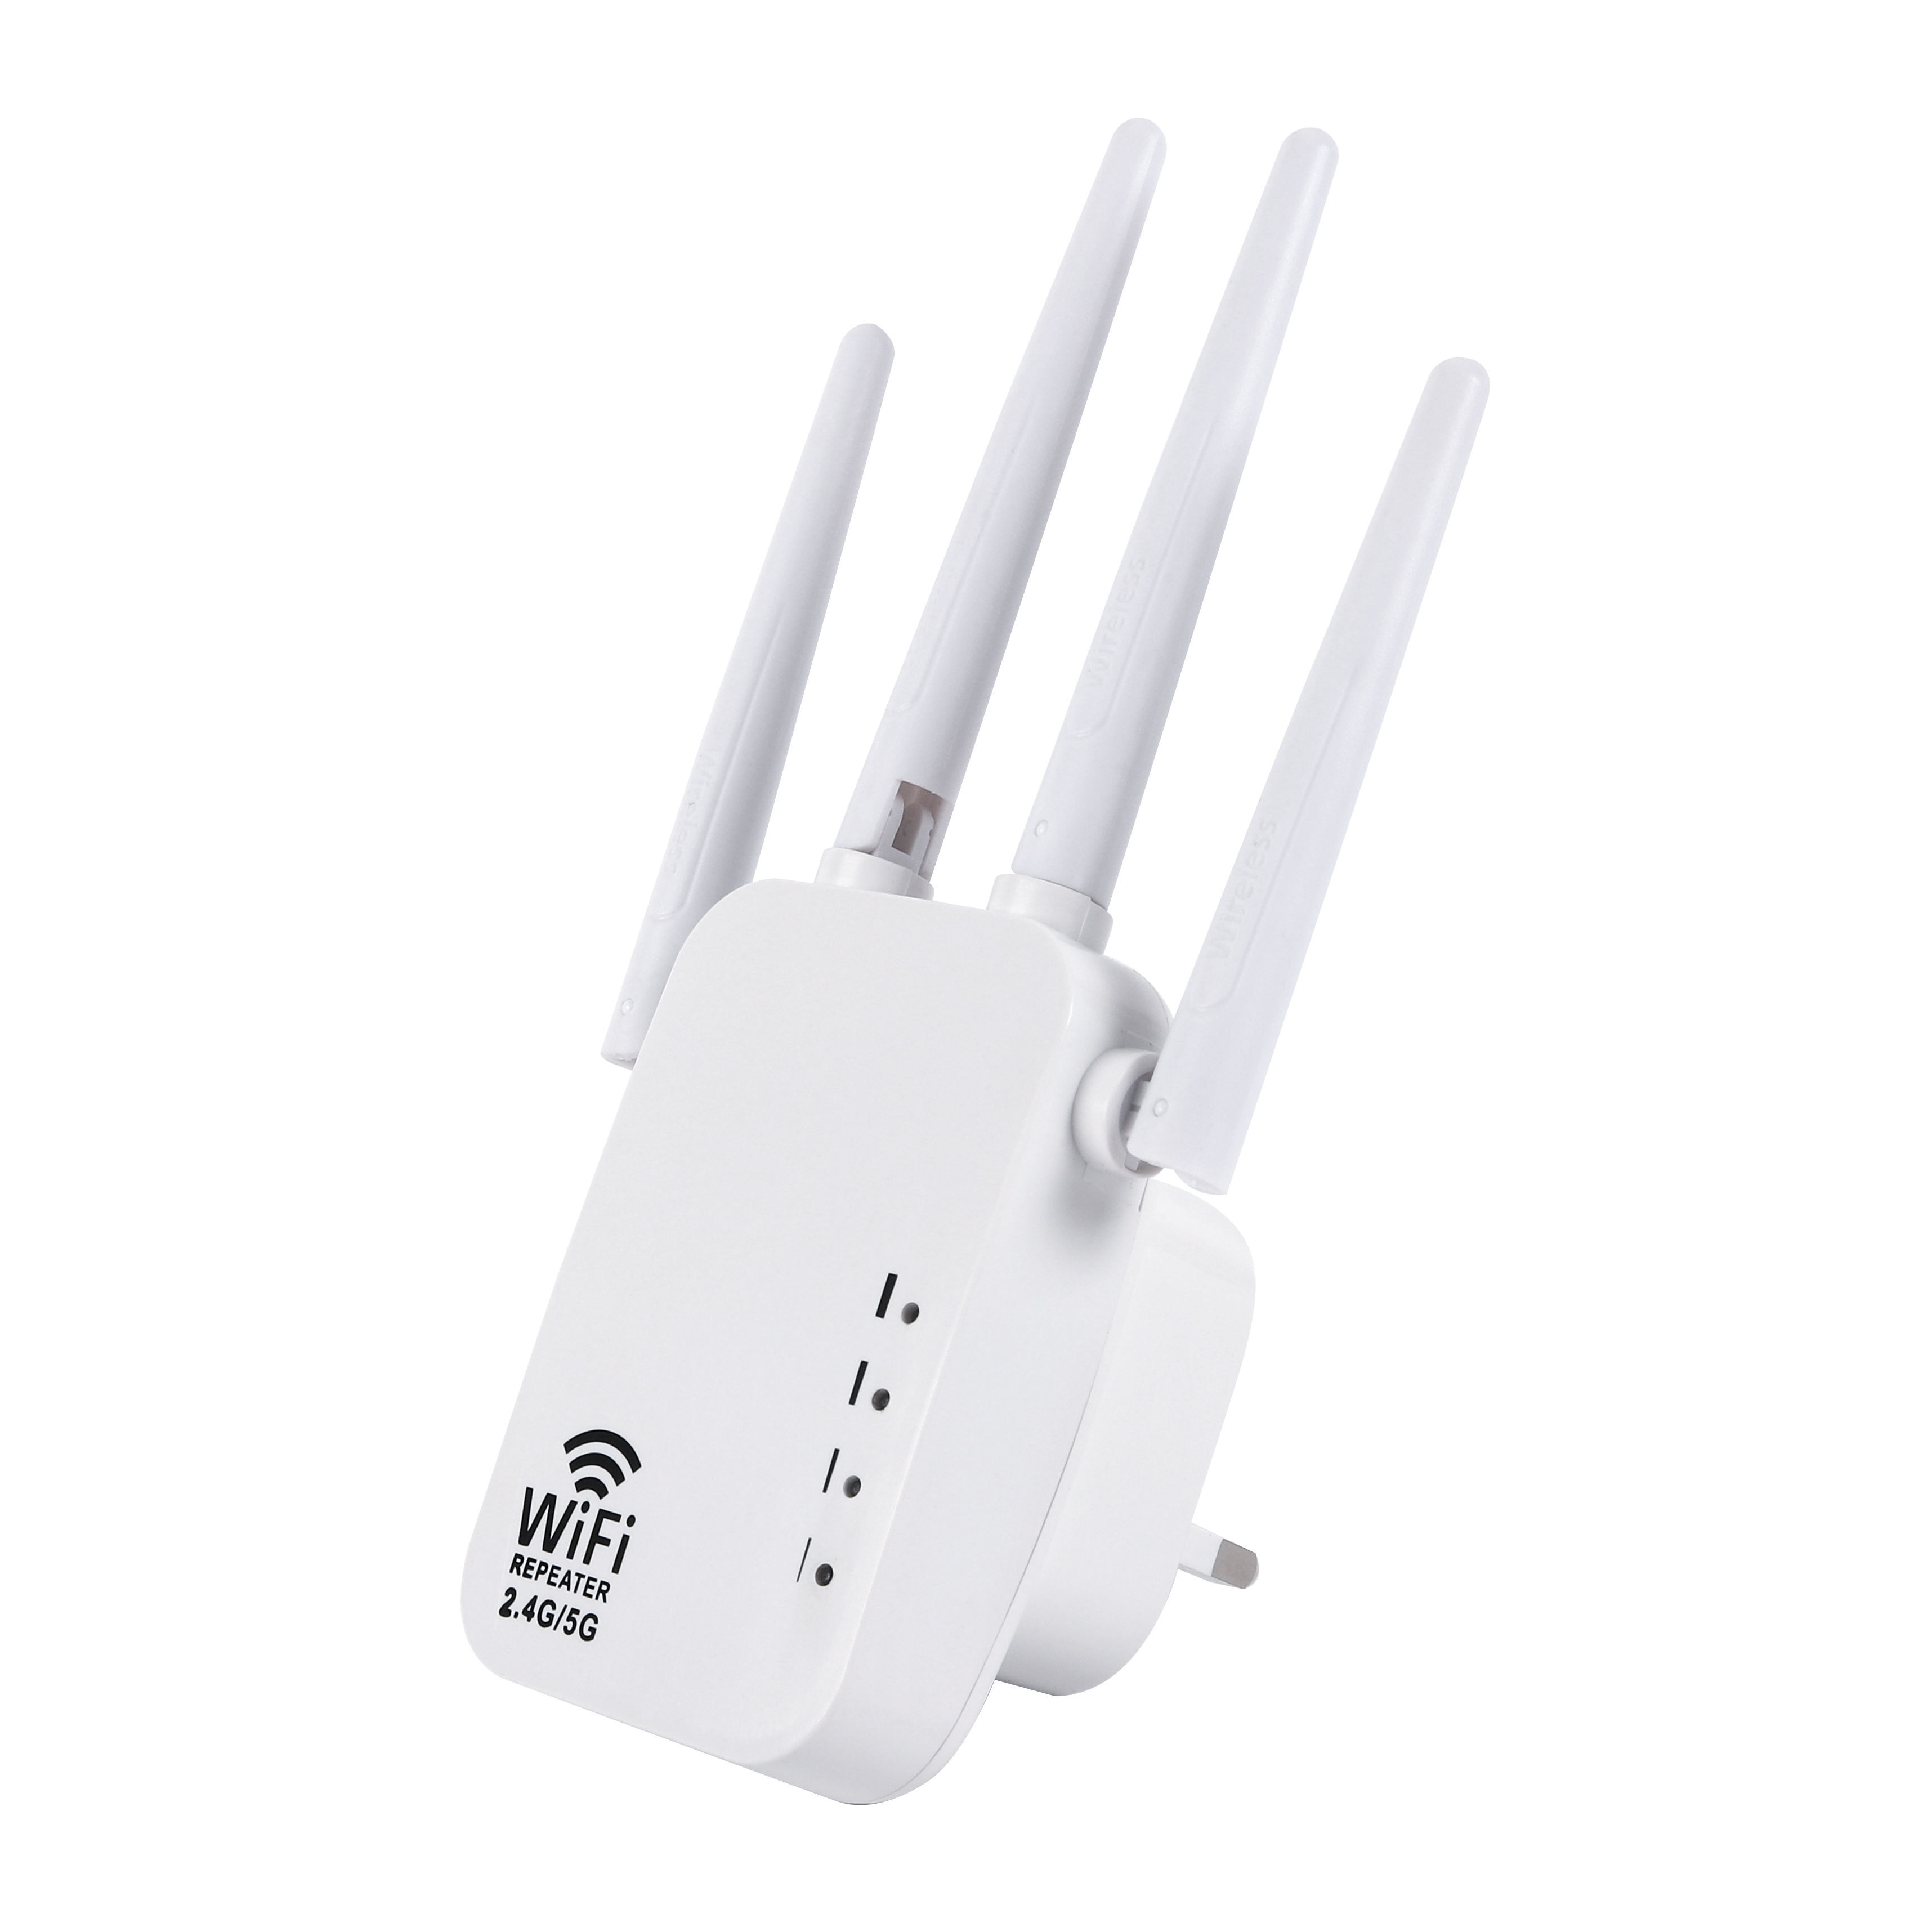 Quality 802.11ac WiFi Long Range Extender 2.4G 5Ghz Wifi Access Points for sale